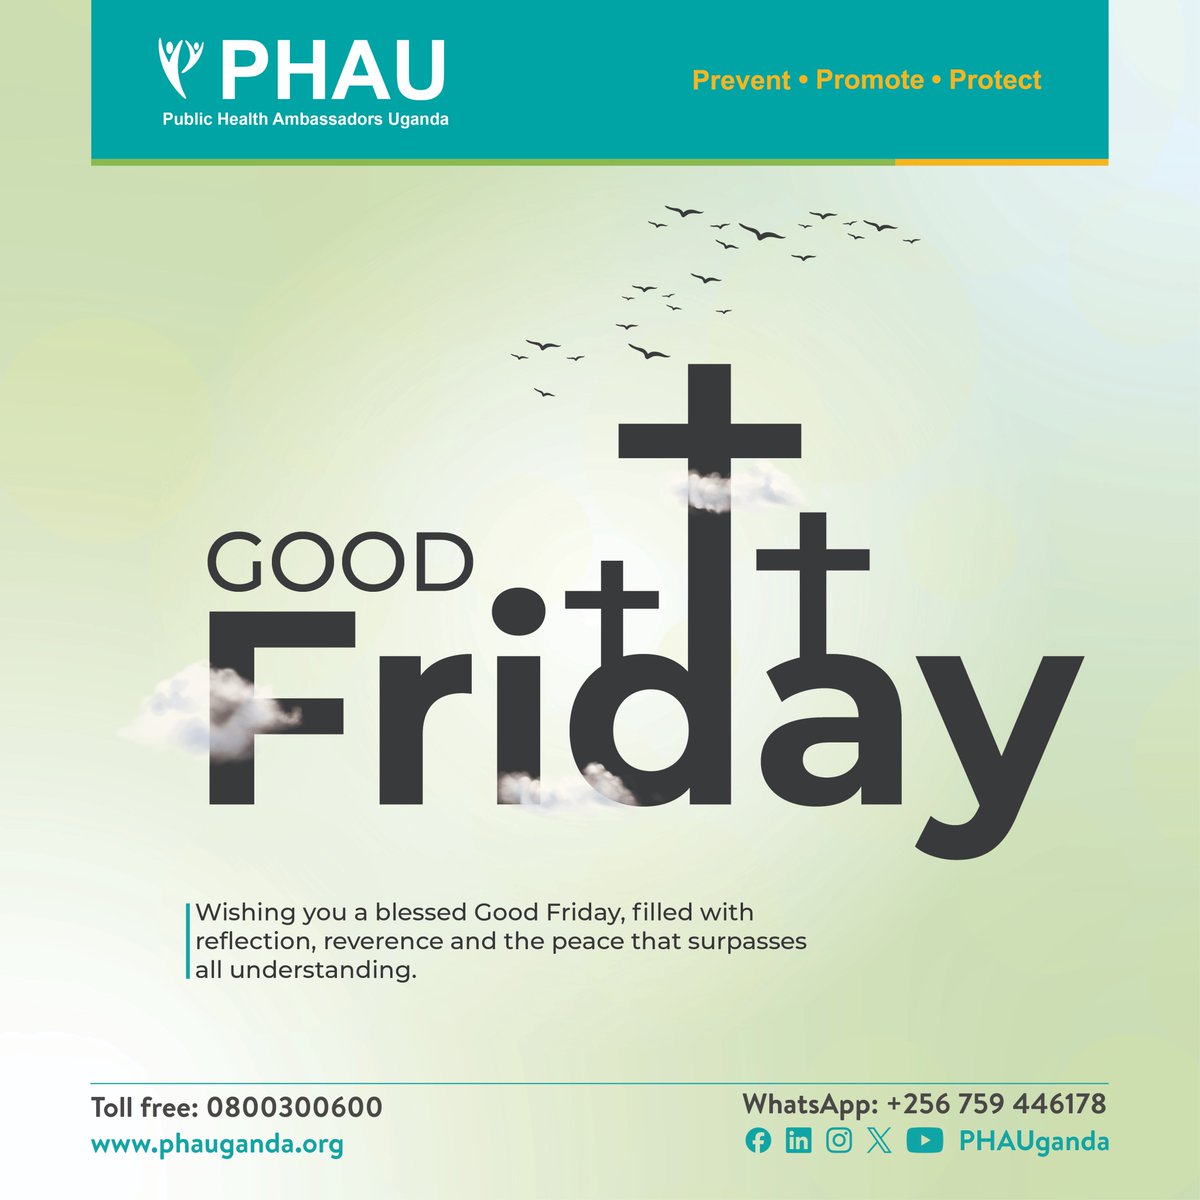 Wishing you a blessed Good Friday filled with reflection, peace, and gratitude. May this solemn day remind us of the sacrifice and love that brings hope to the World. #PHAUCARES #GoodFriday #Reflection